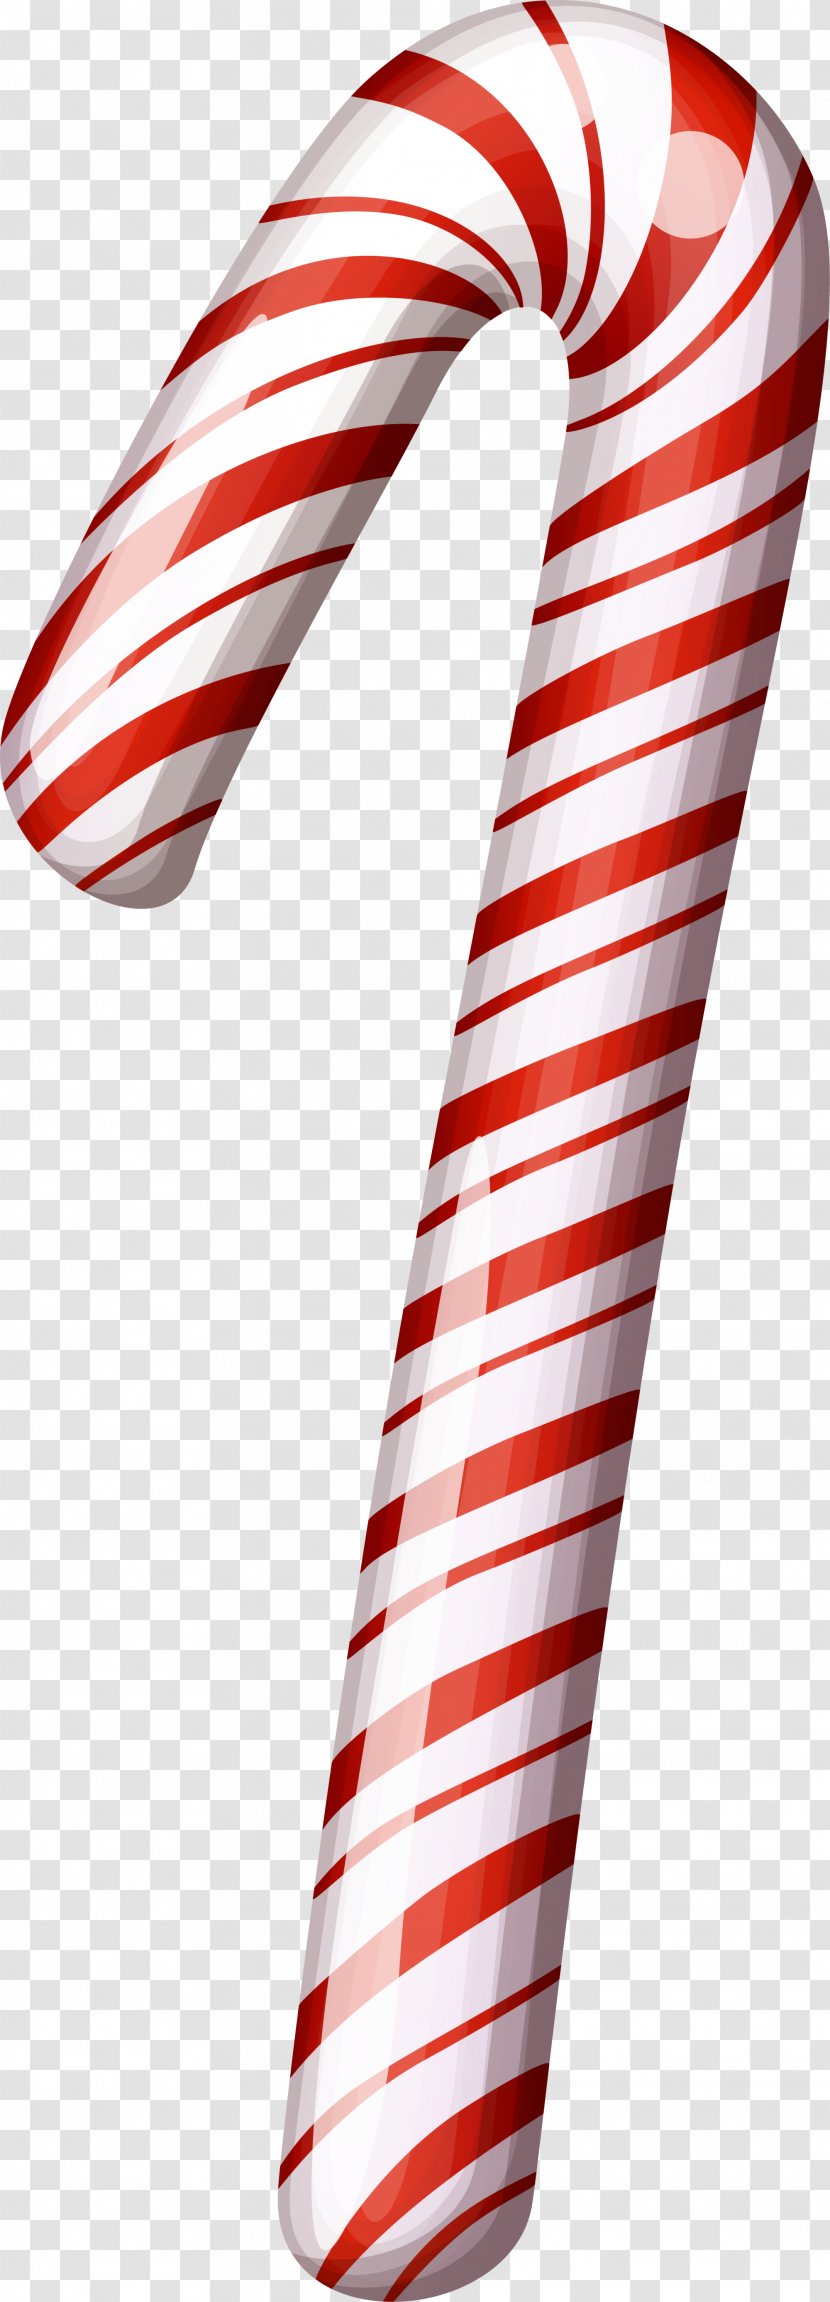 Candy Cane Polkagris Animation - Red Cartoon Transparent PNG